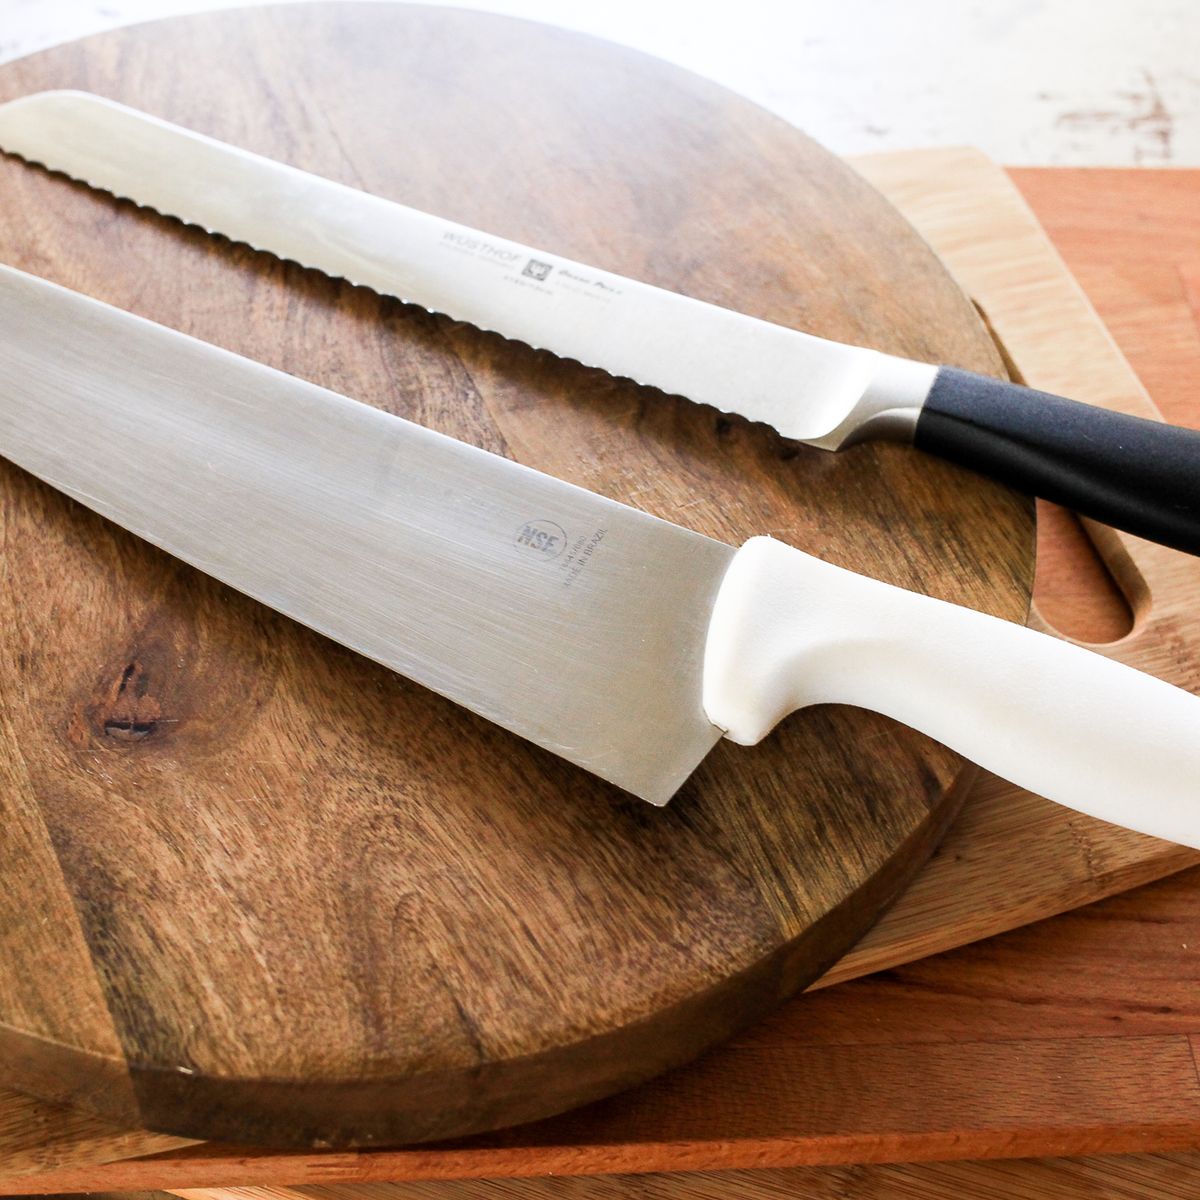 How to Choose the the Right Knives for Your Kitchen? - Best